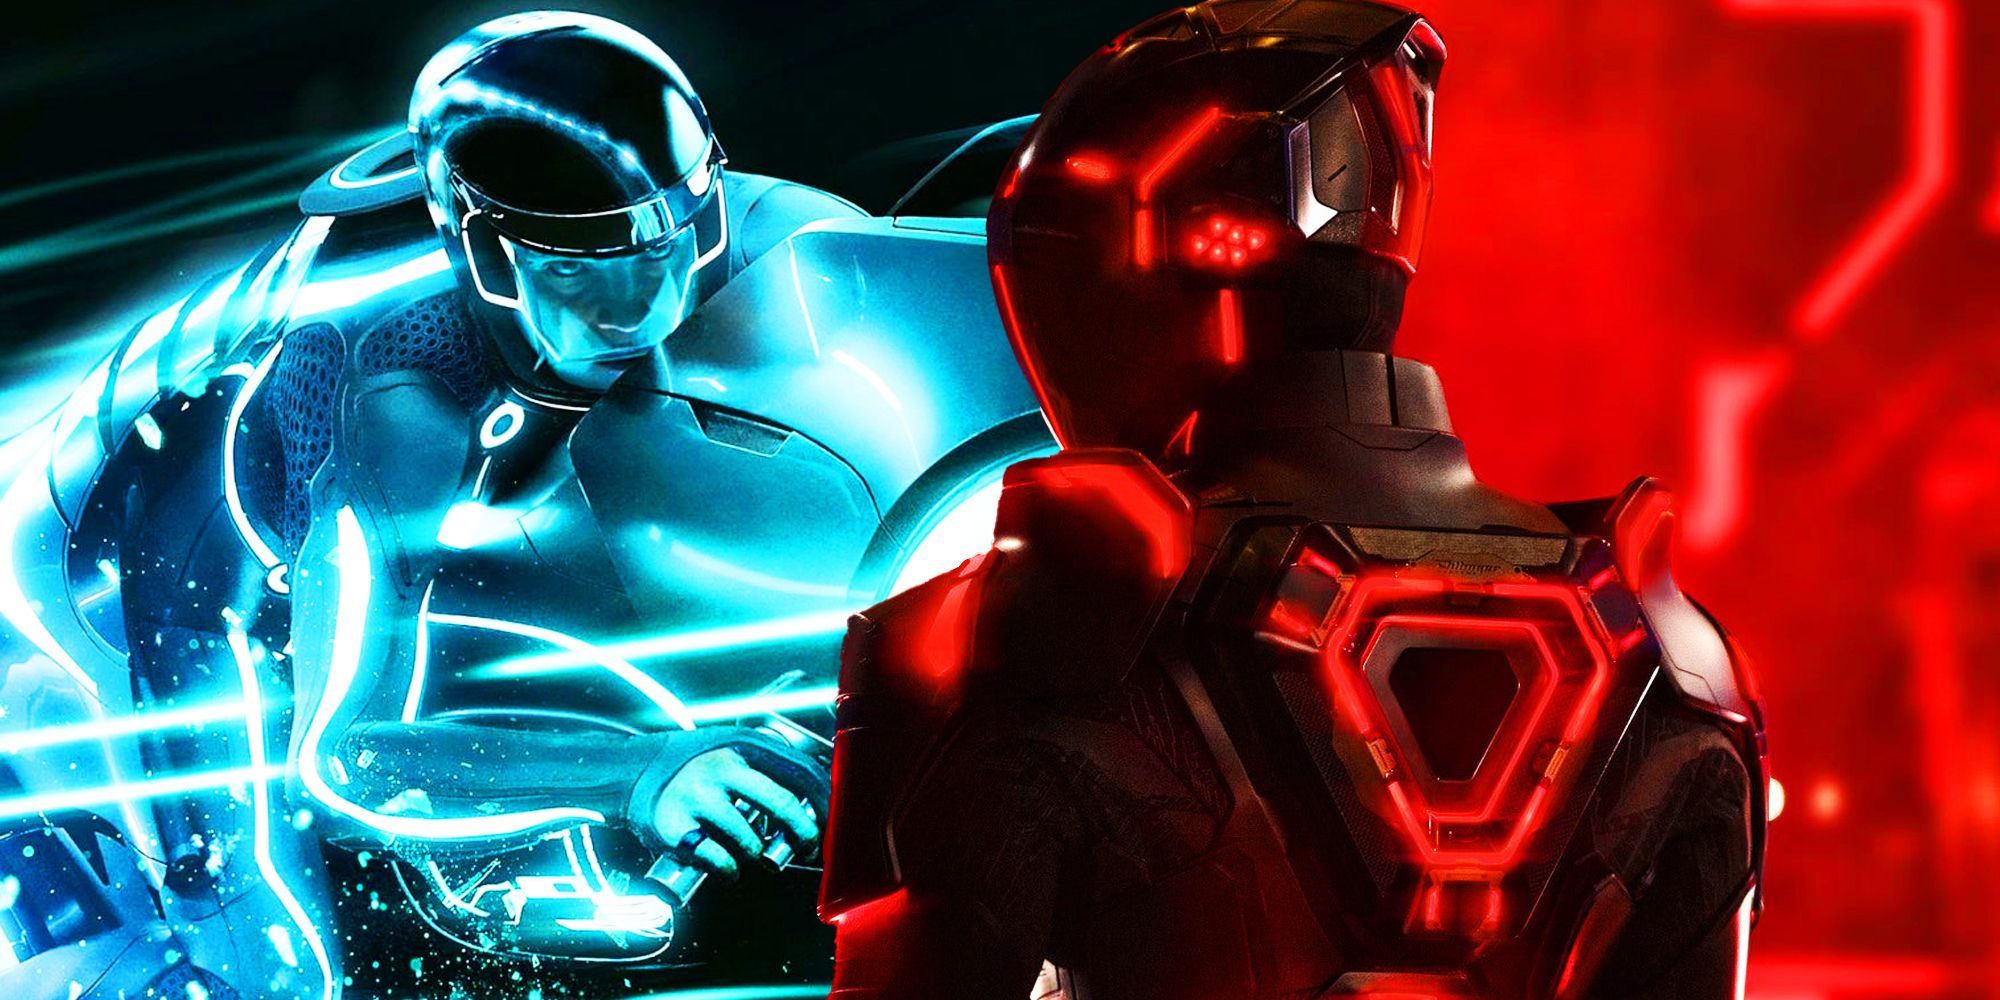 TRON Ares and TRON Legacy